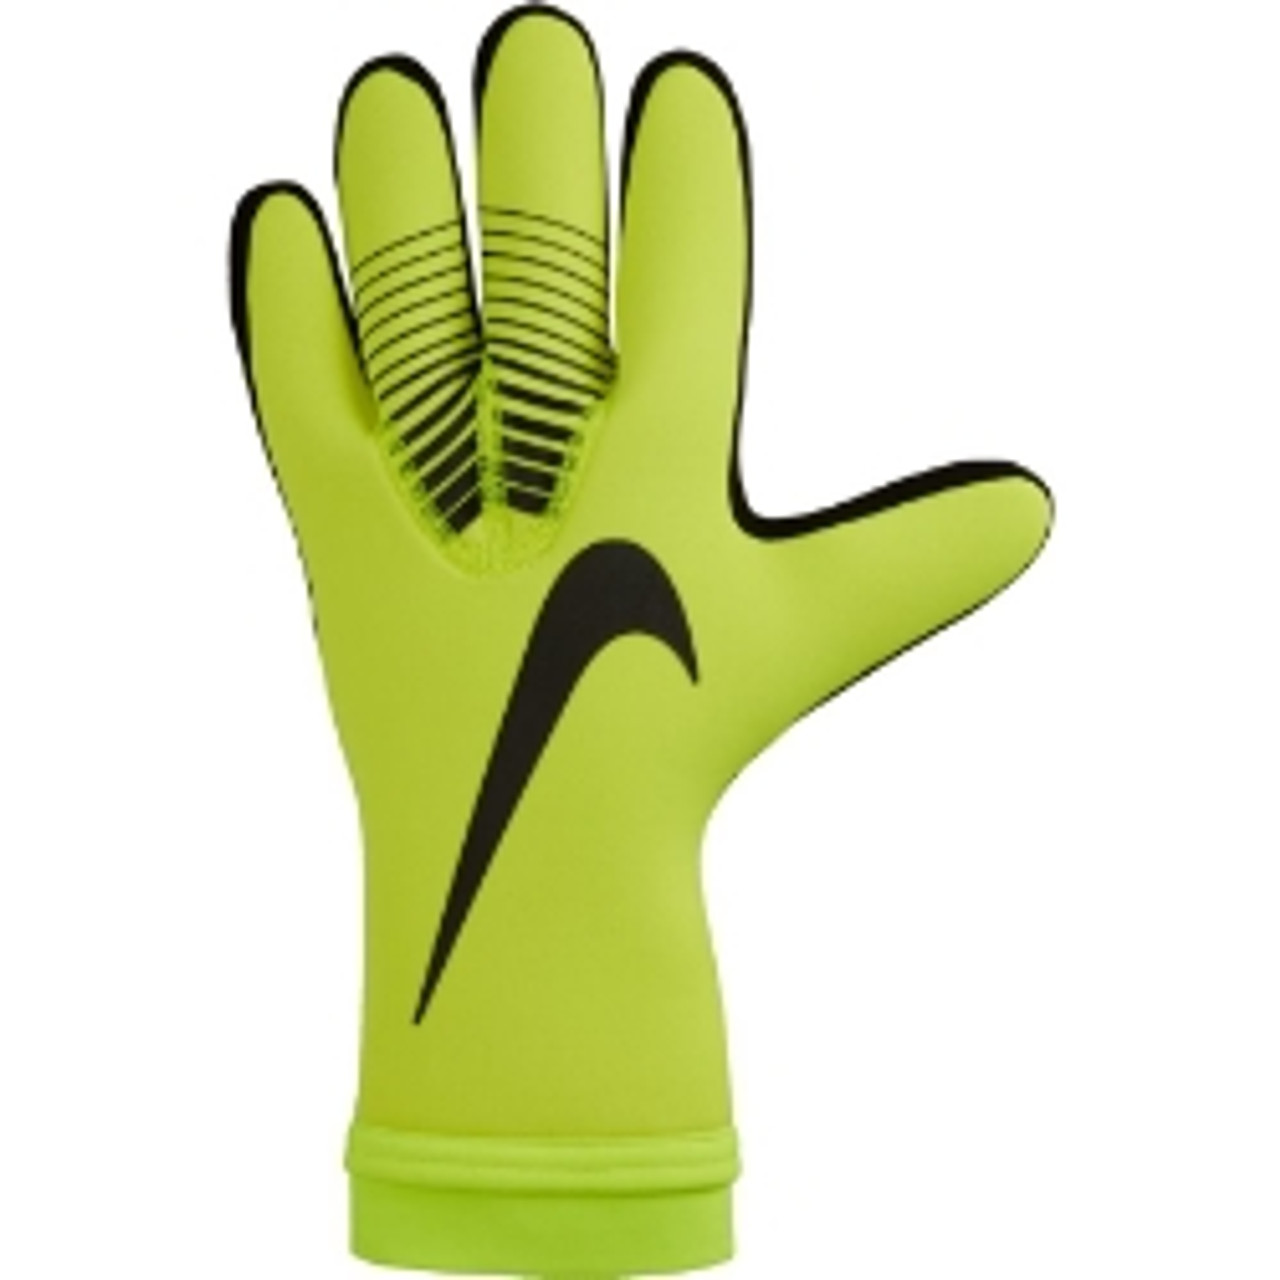 NIKE MERCURIAL GK Touch Pro Glove -